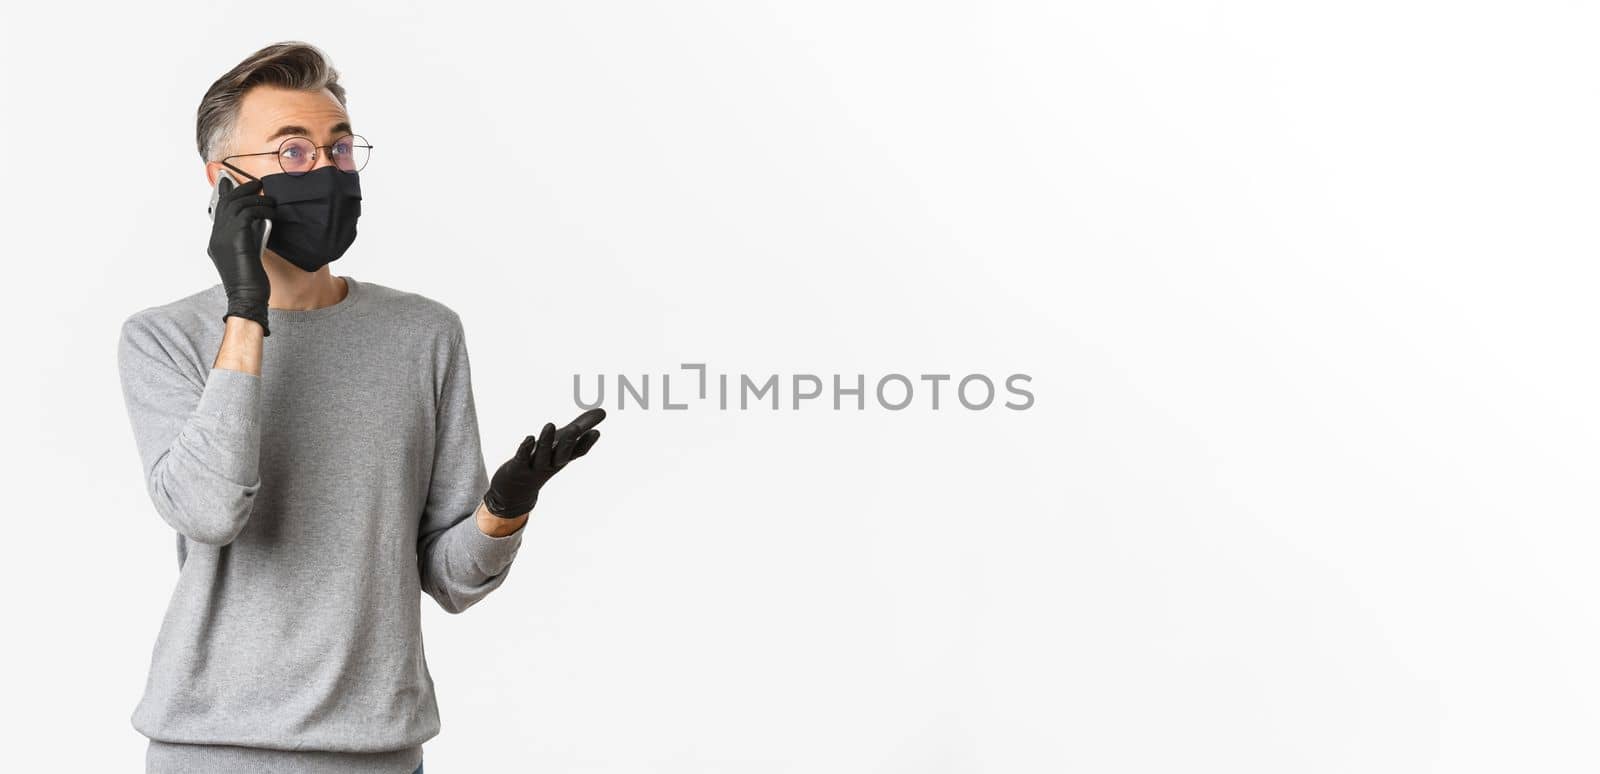 Concept of covid-19, social distancing and lifestyle. Image of handsome middle-aged man in medical mask and gloves, talking on mobile phone, standing over white background.